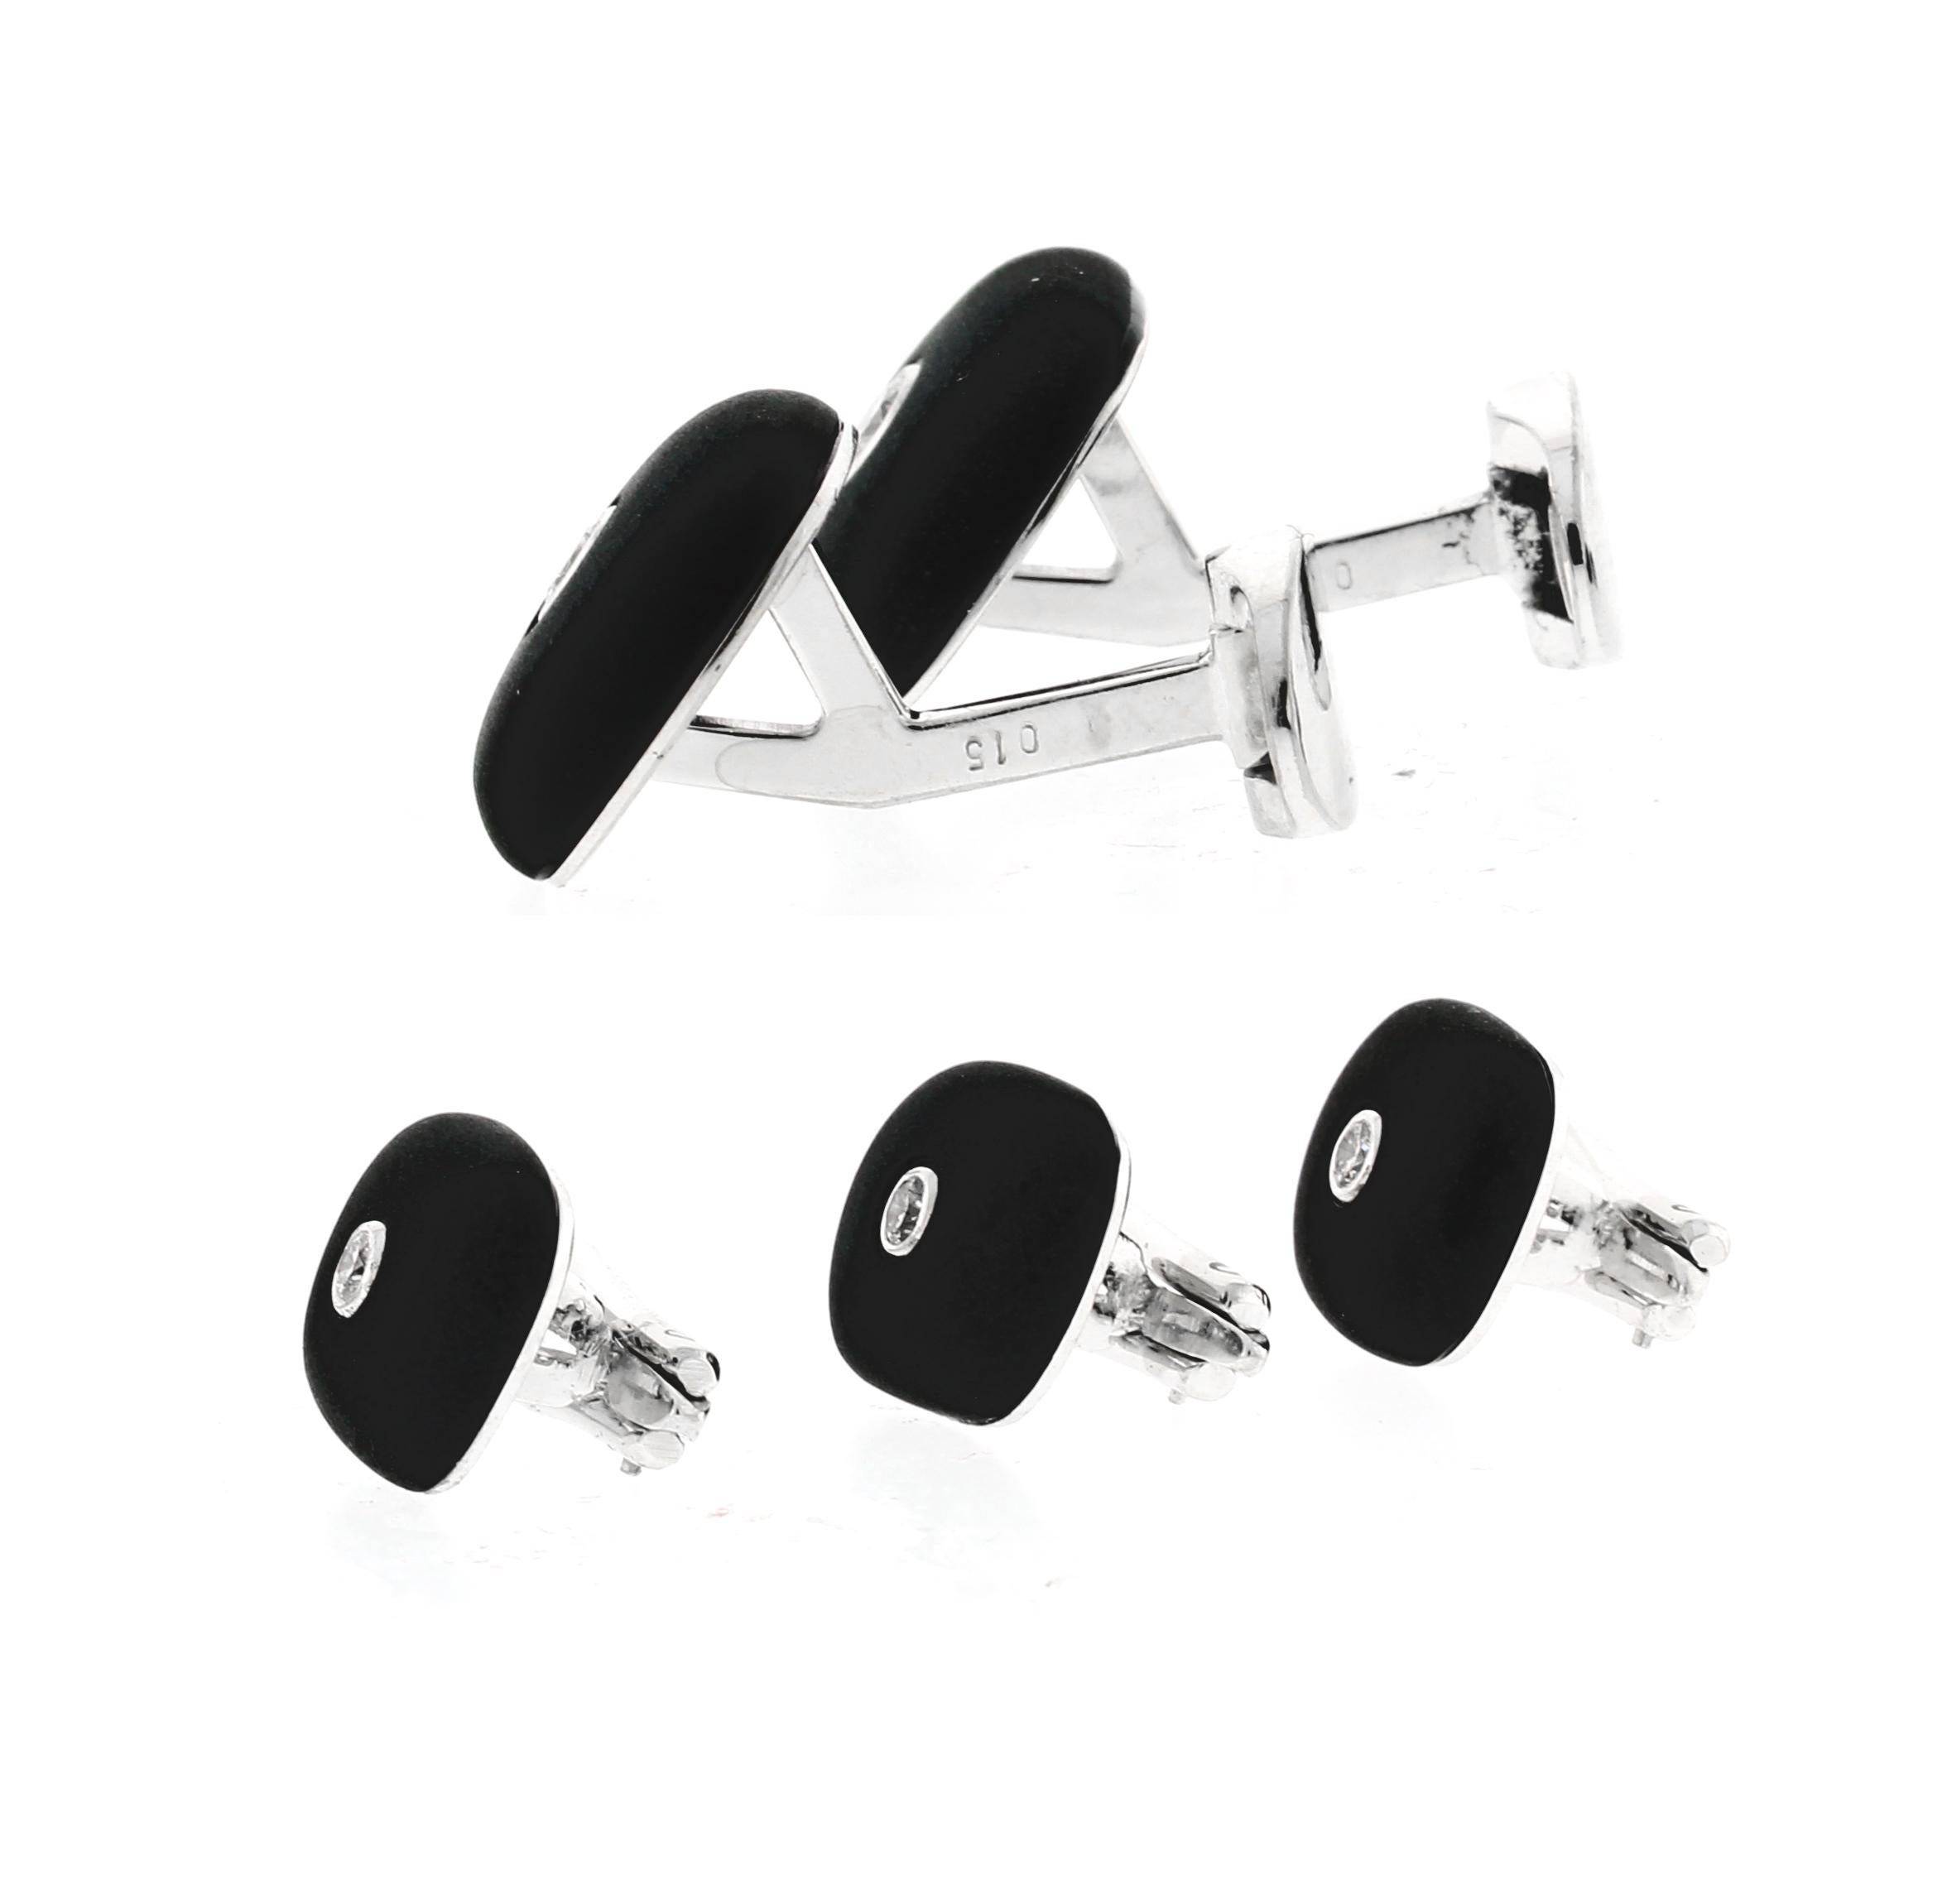 These beautiful 18 karat white gold cufflinks were made in Germany.
♦ Designer: Joseph Orlando
♦ Metal: 18 karat white gold
♦ Gemstone: Diamond Black Onyx
♦ Dimensions: 5/8in by 1/2in
♦ Packaging: Pampillonia presentation box
♦ Condition: Excellent,